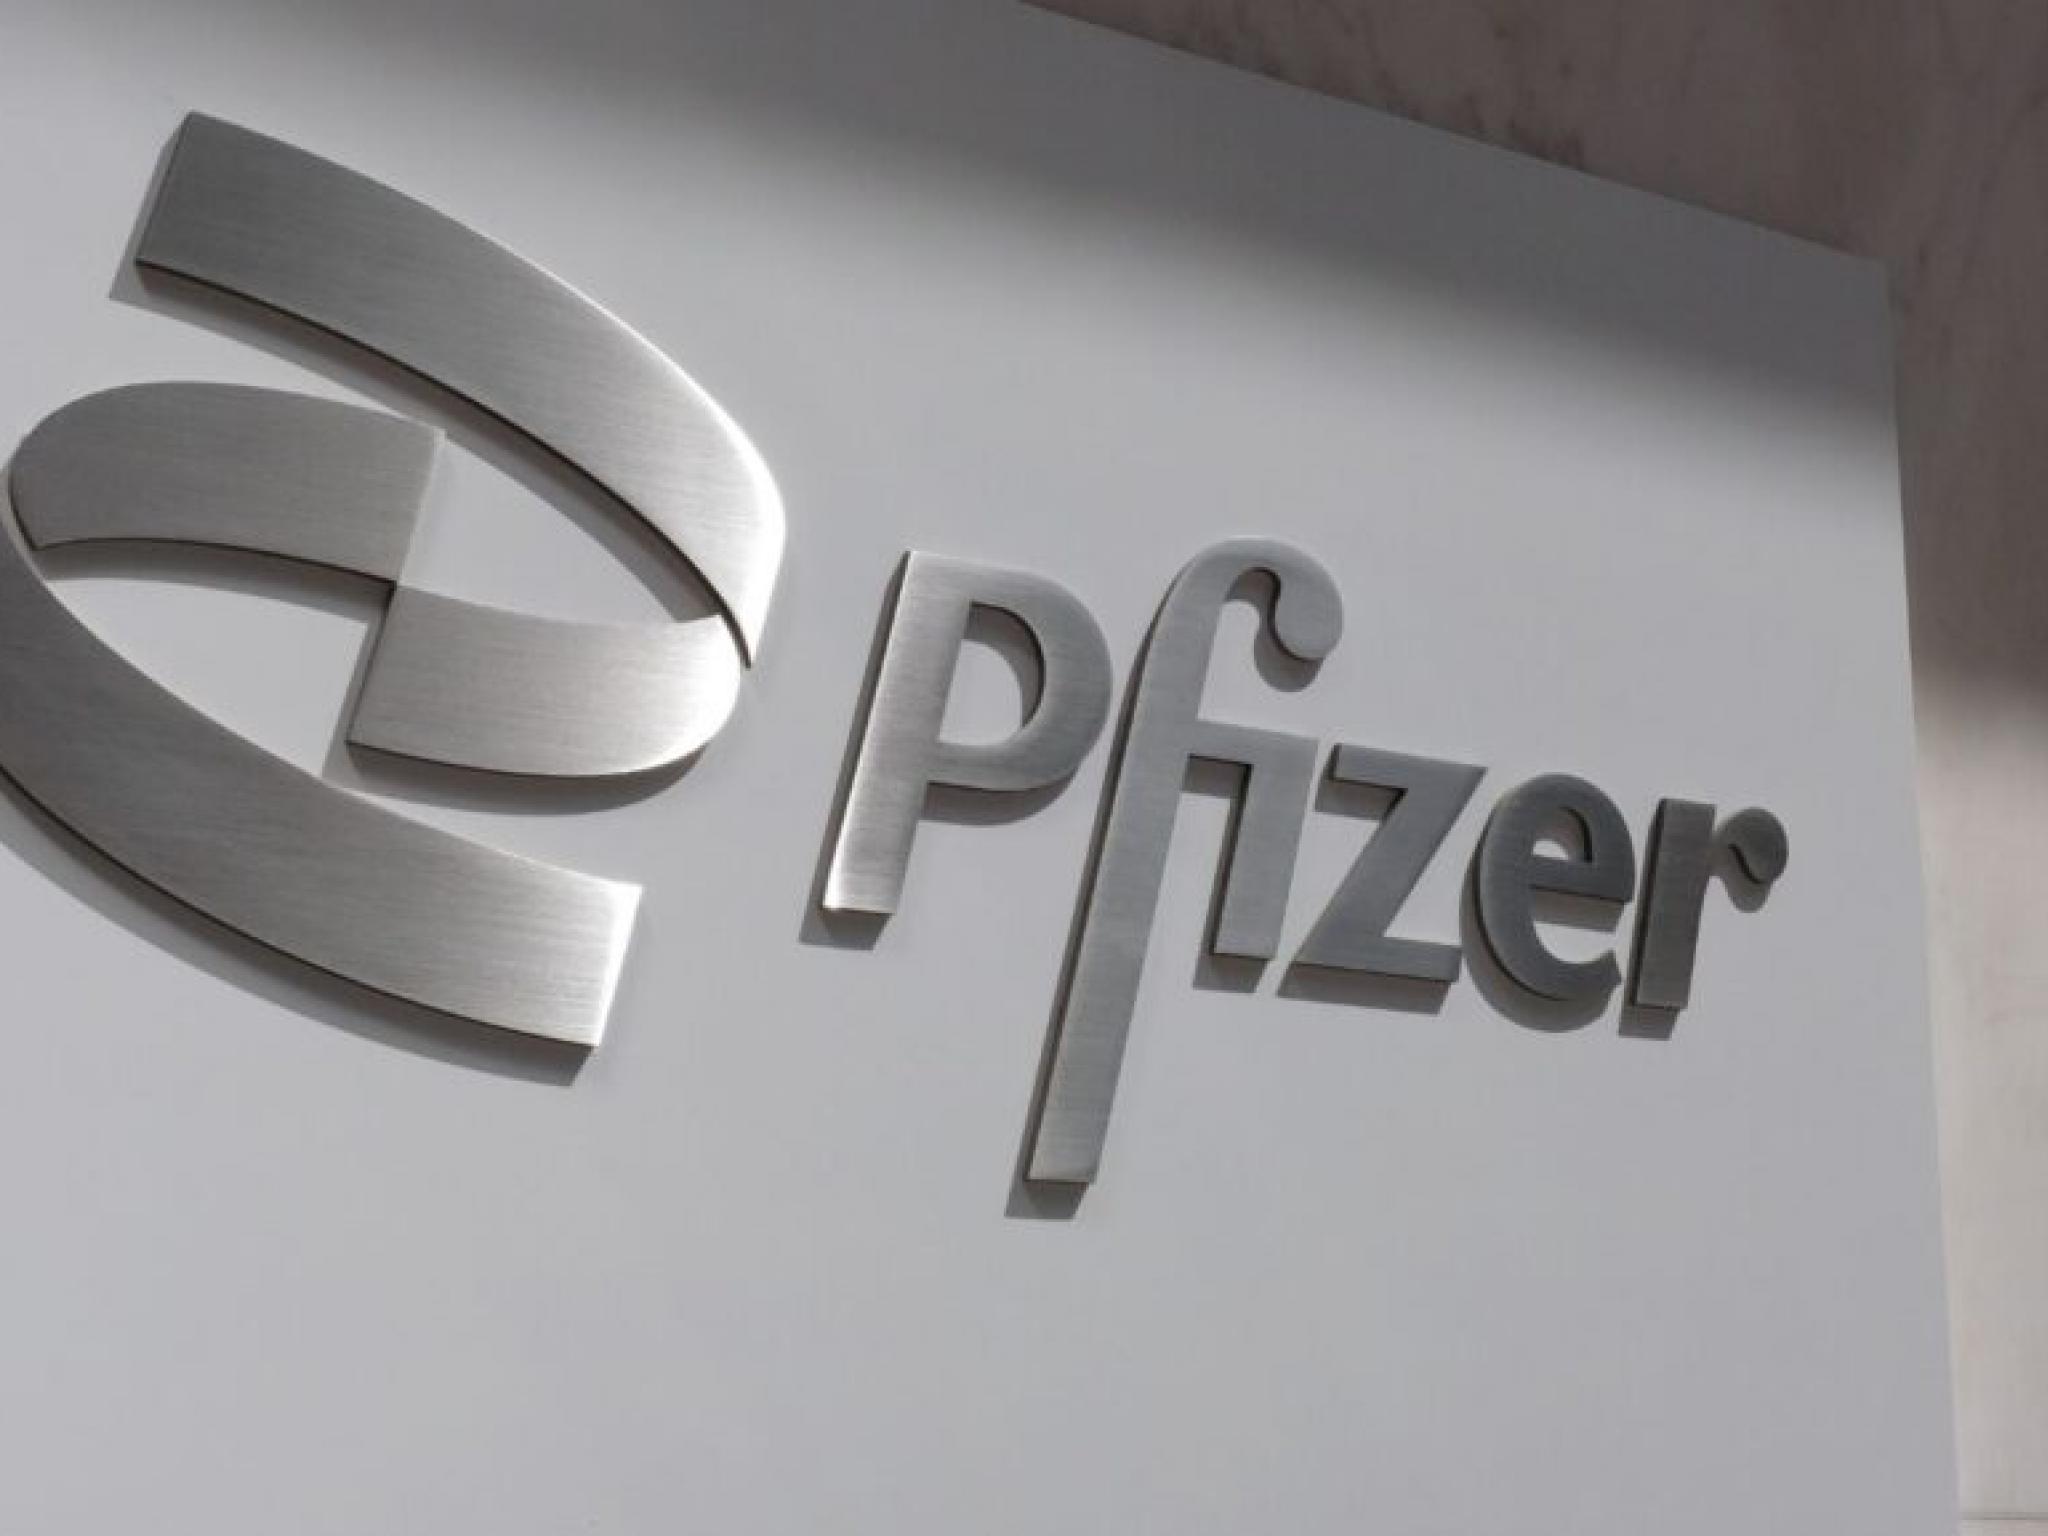  pfizers-covid-19-vaccine-safety-claims-under-lens-faces-lawsuit-from-kansas-for-alleged-misleading-claims 